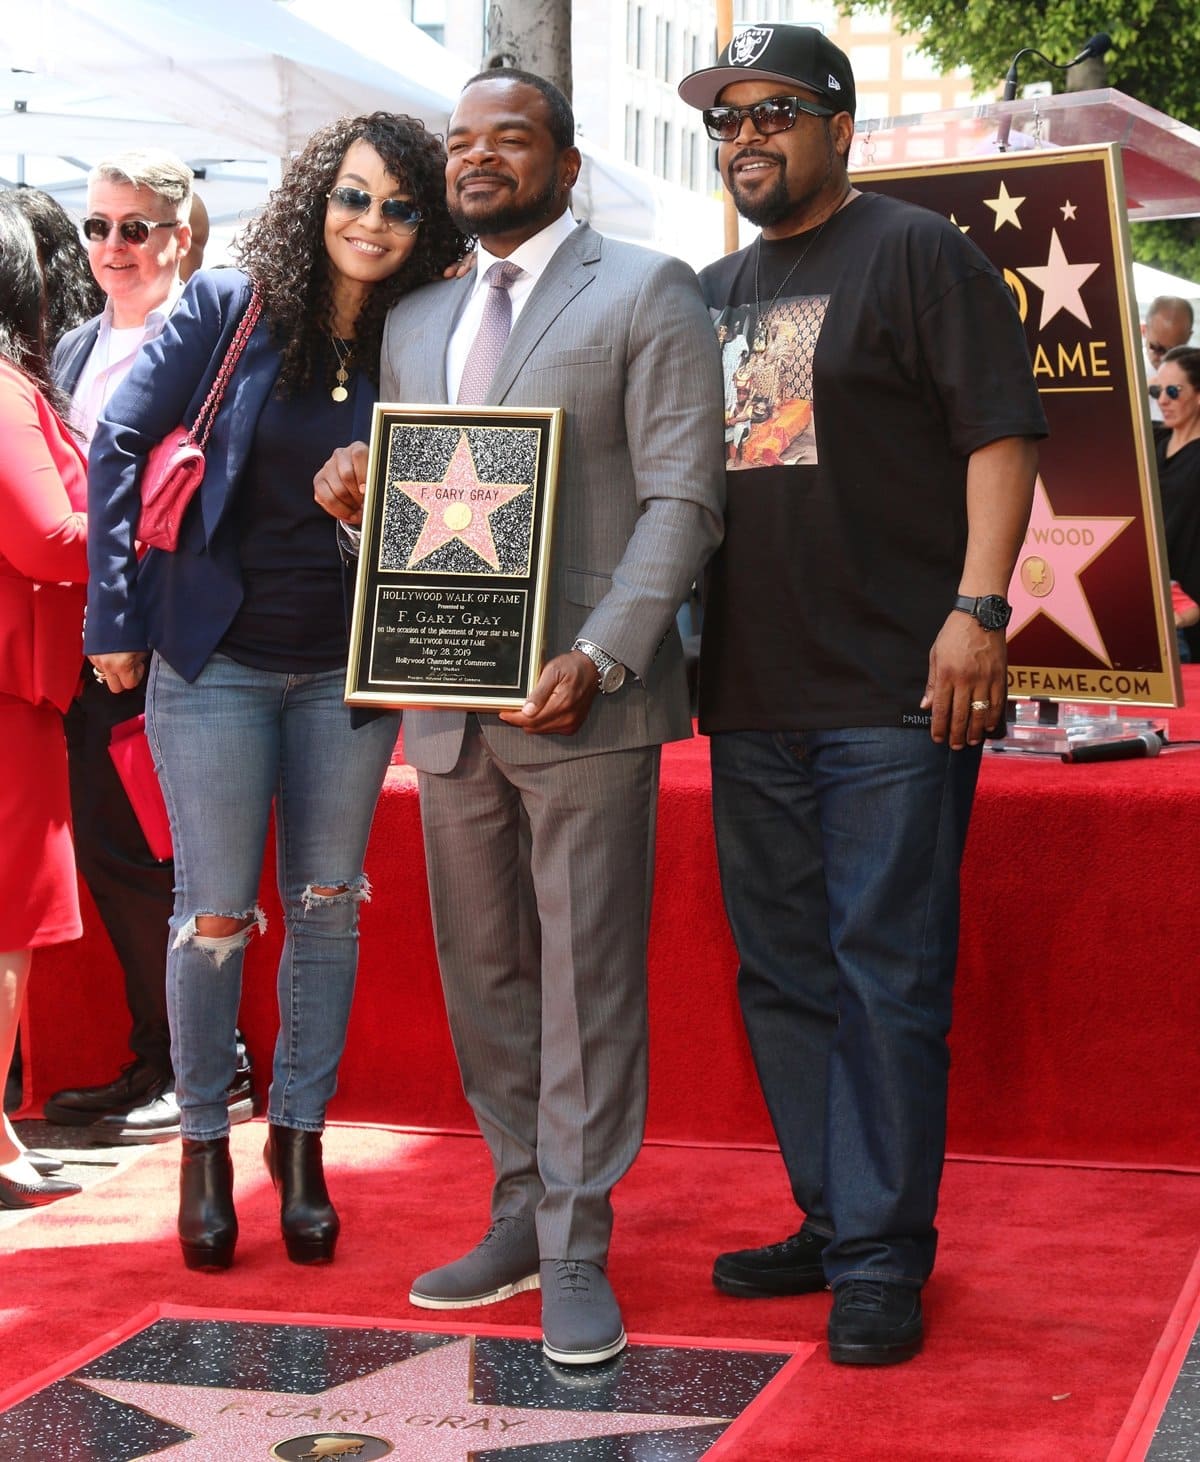 Ice Cube and his wife Kimberly Woodruff were in attendance at the Hollywood Walk of Fame event honoring Director F. Gary Gray